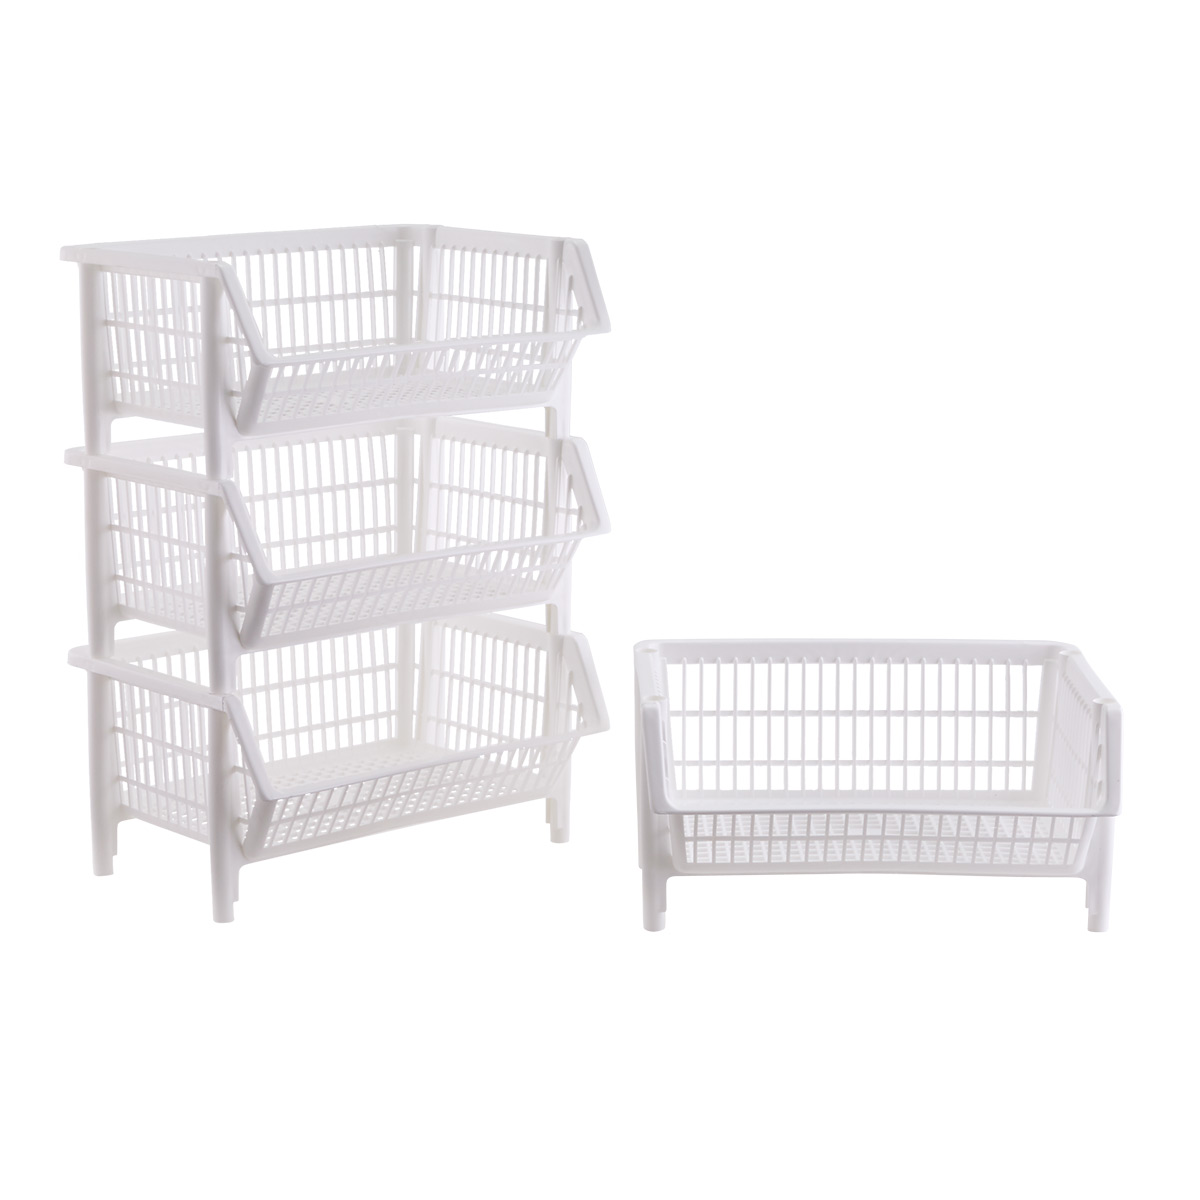 https://www.containerstore.com/catalogimages/379919/133700-large-stack-basket-white.jpg